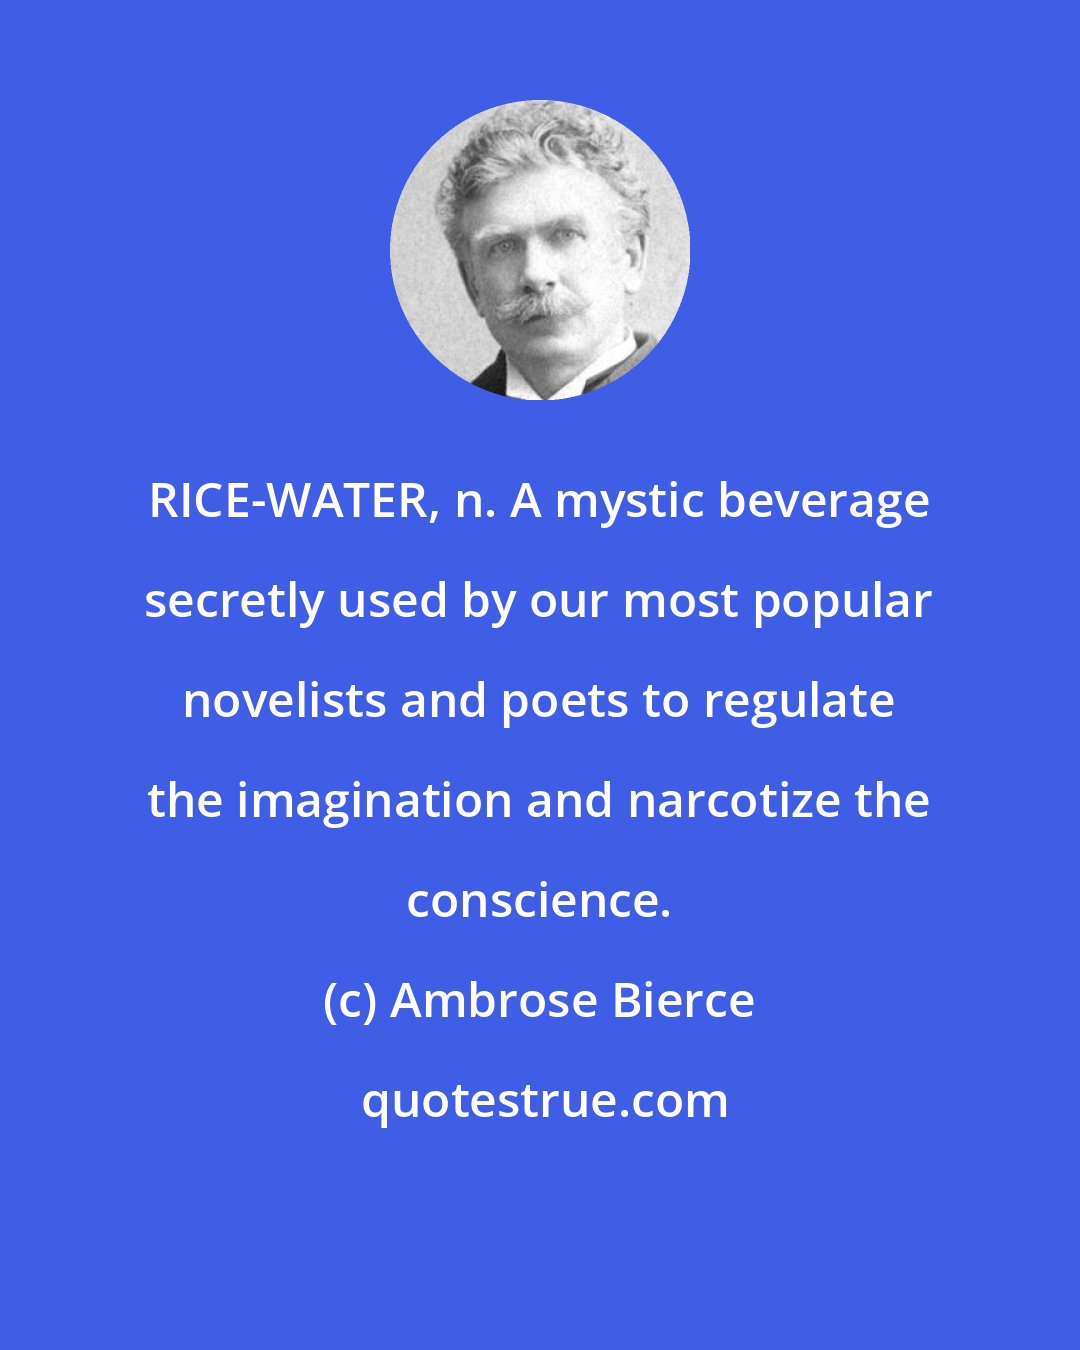 Ambrose Bierce: RICE-WATER, n. A mystic beverage secretly used by our most popular novelists and poets to regulate the imagination and narcotize the conscience.